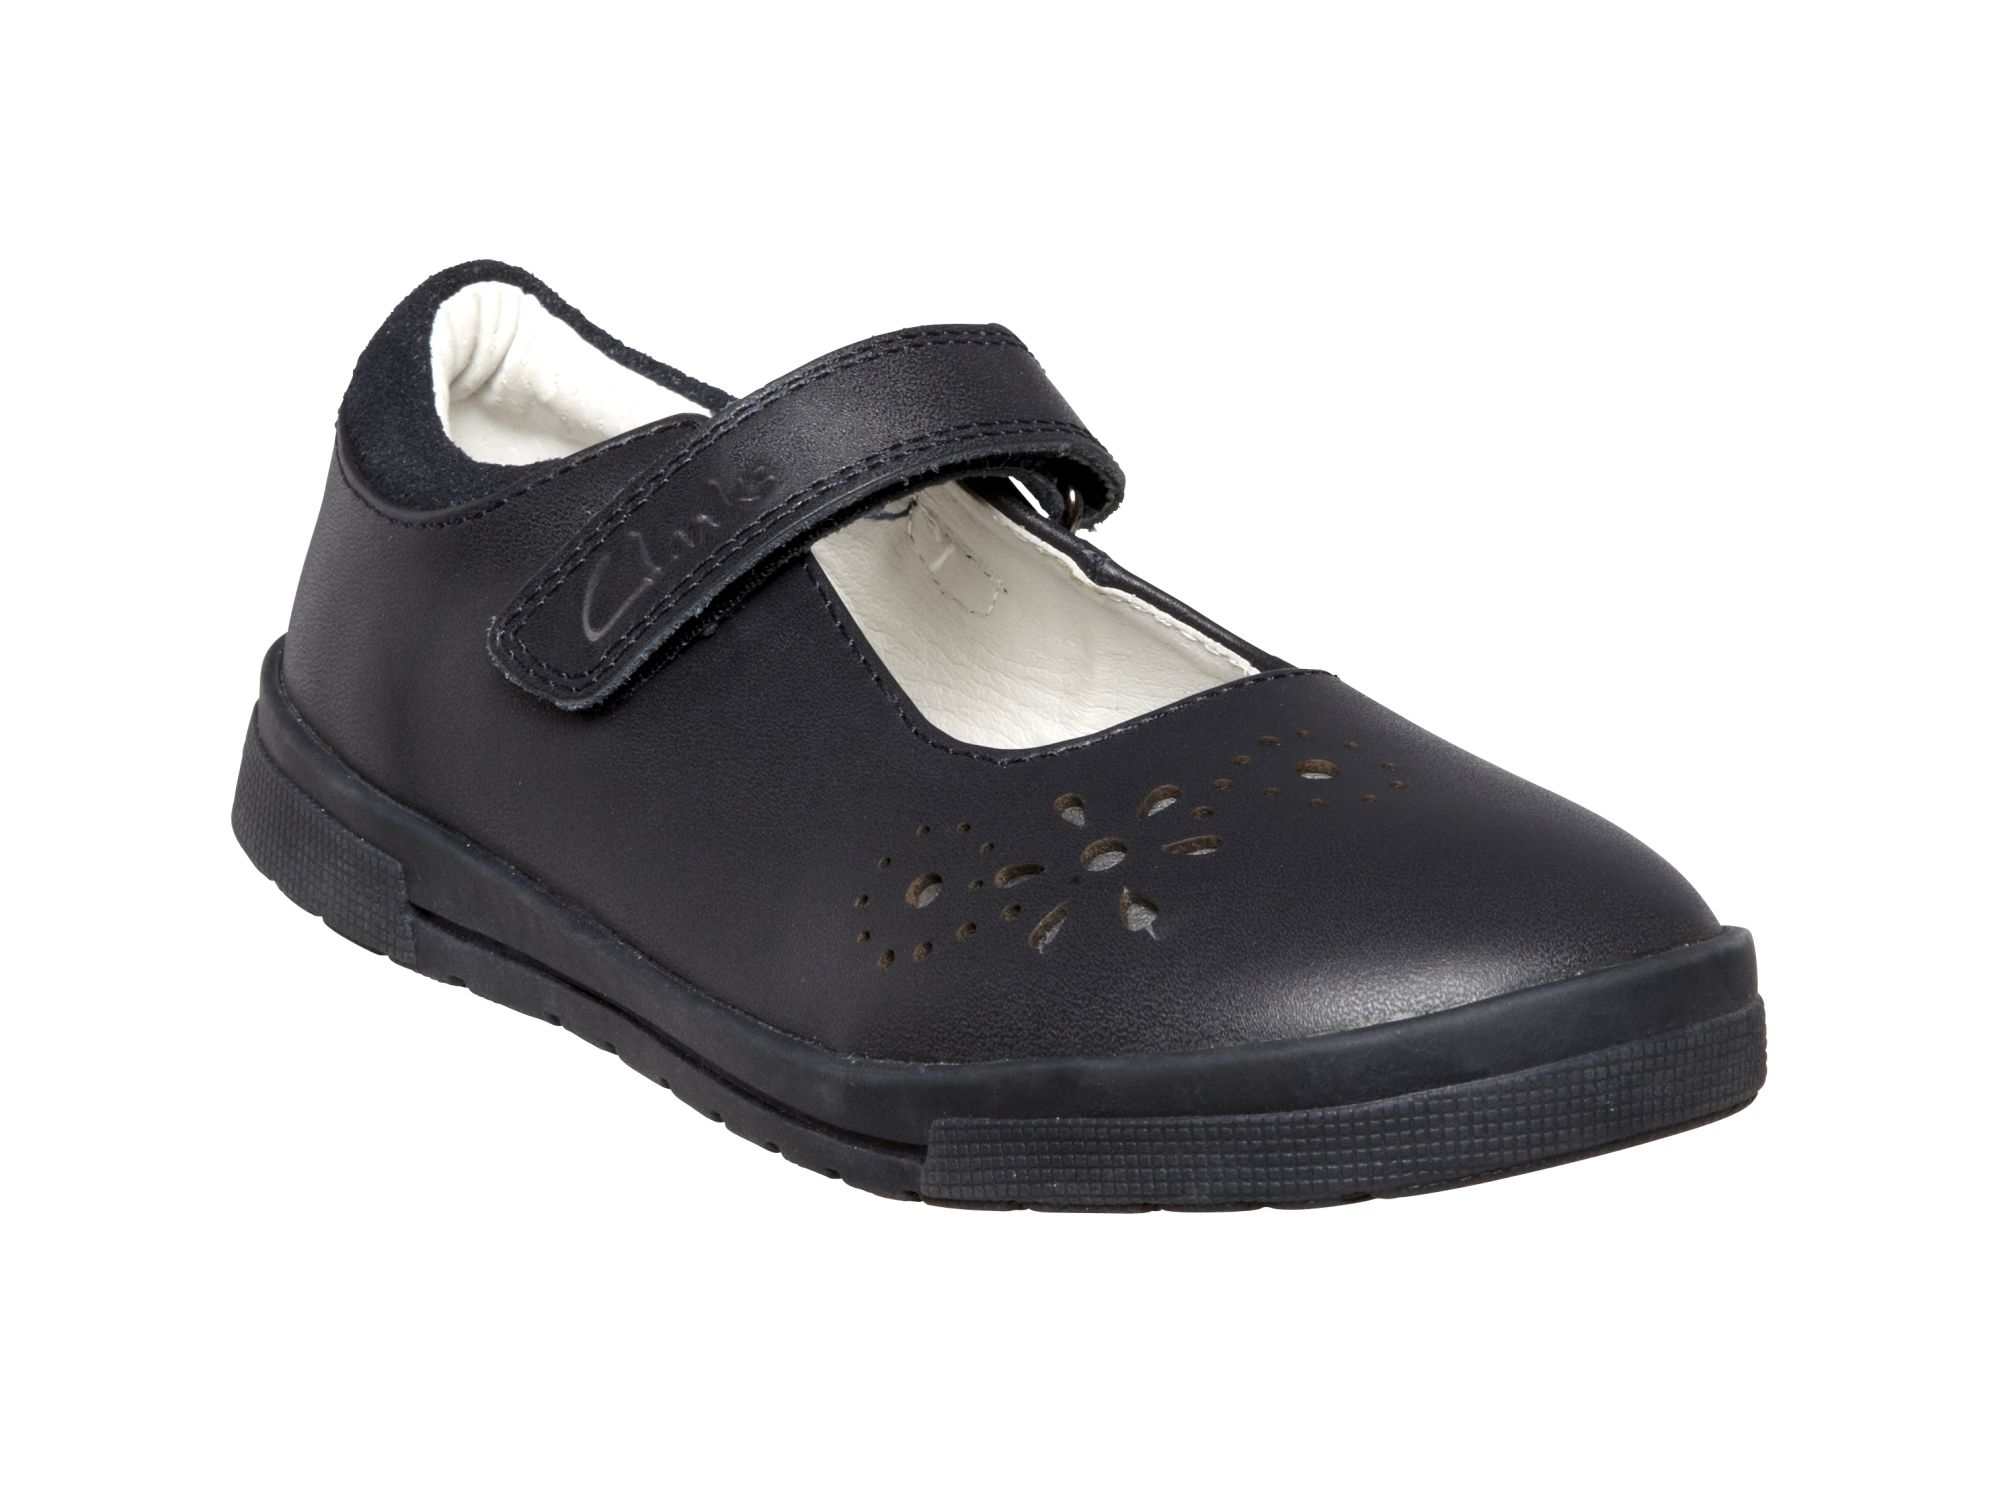 Shoes, School 'Nomads'; Clarks; 1980-1990; WY.1992.59.1 | eHive